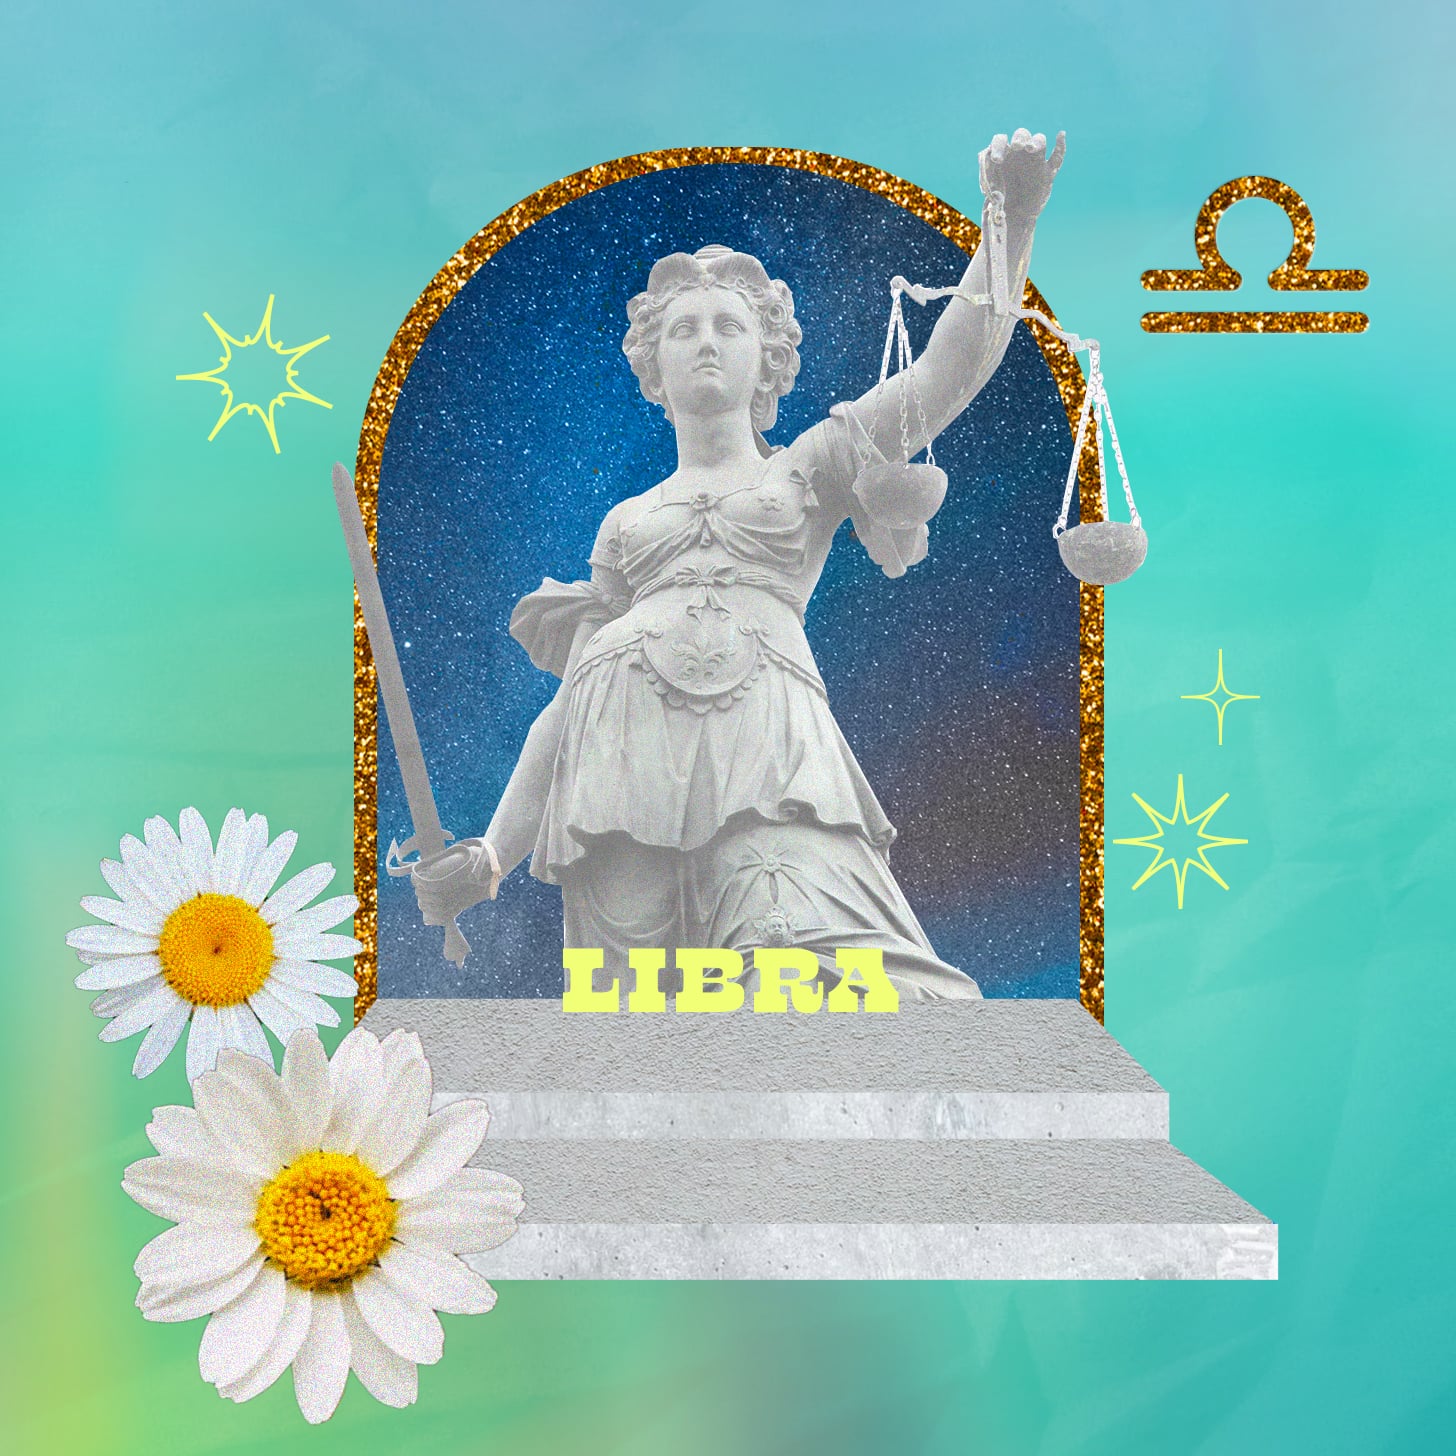 Libra weekly horoscope for July 10, 2022